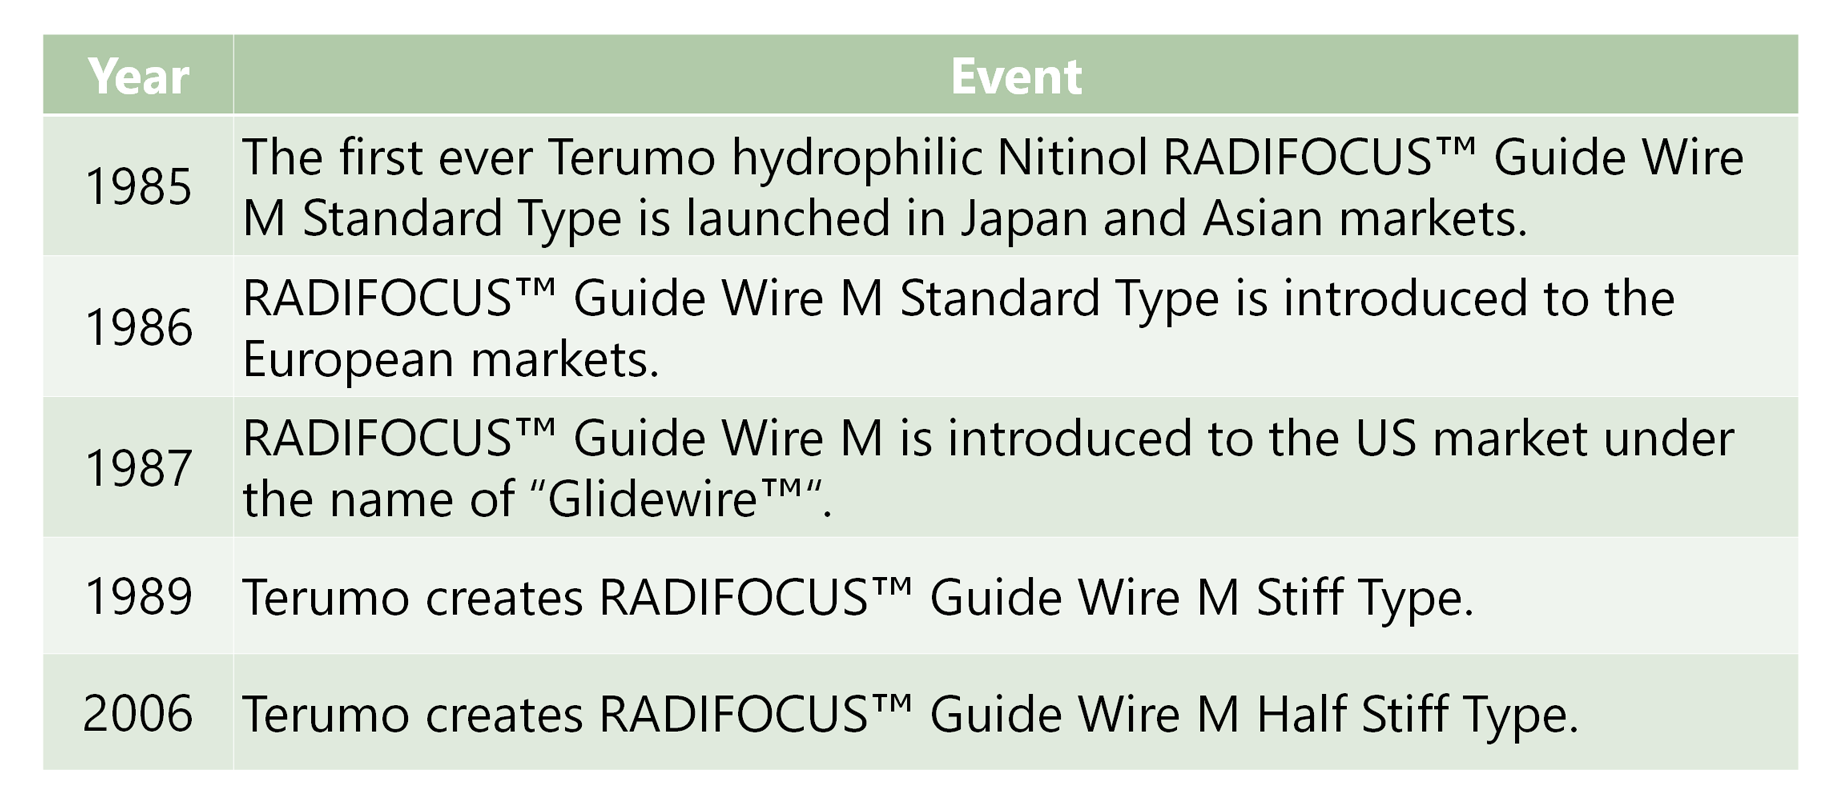 History of radifocus guidewire launch over 37 years